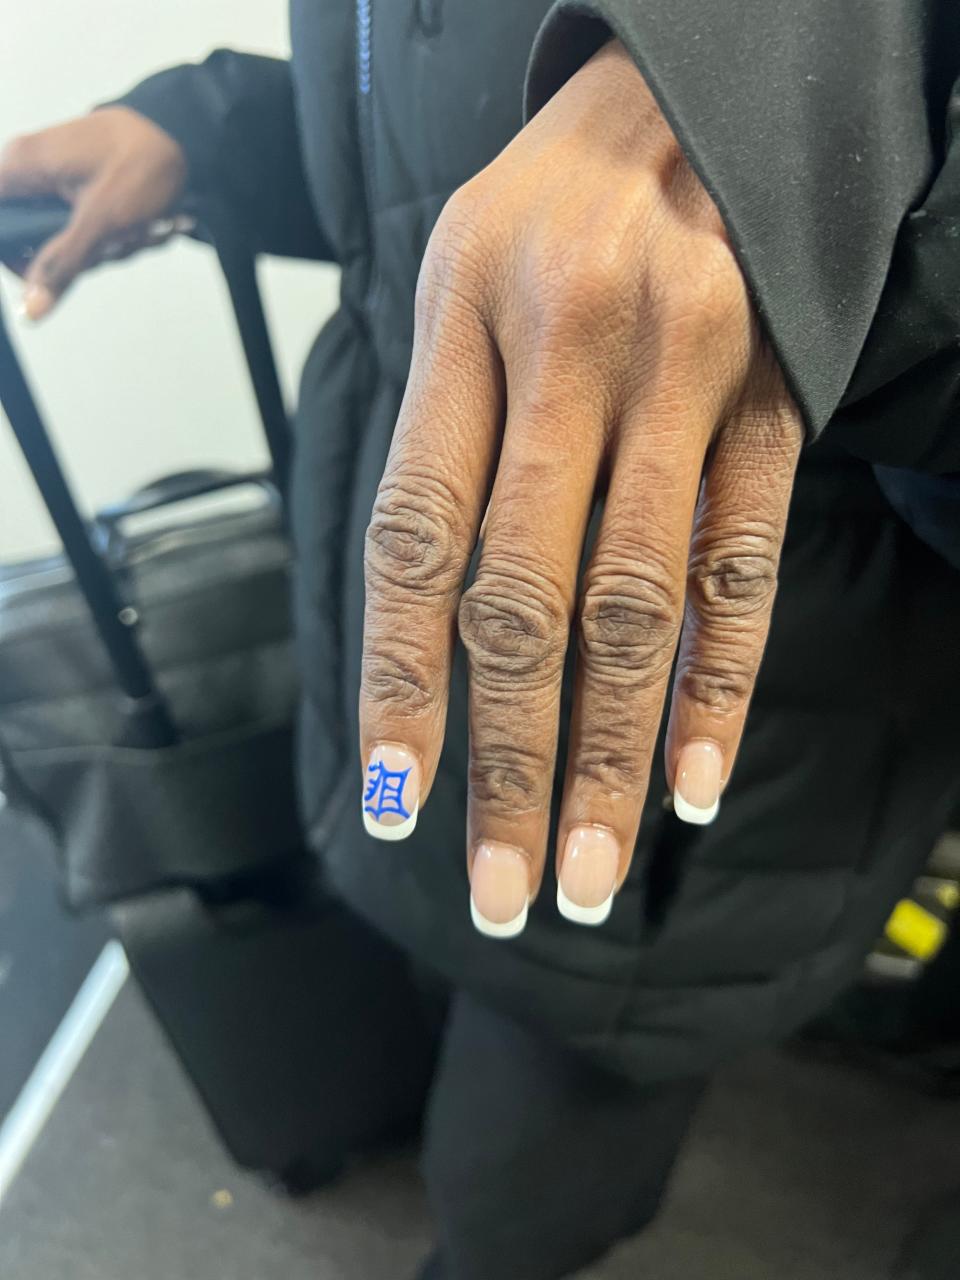 Cherlyn Rupert shows off her Detroit-themed nails before boarding a plane at Detroit Metropolitan Airport. The Detroit Lions season ticket holder plans to attend the NFC Championship game against the San Francisco 49ers.